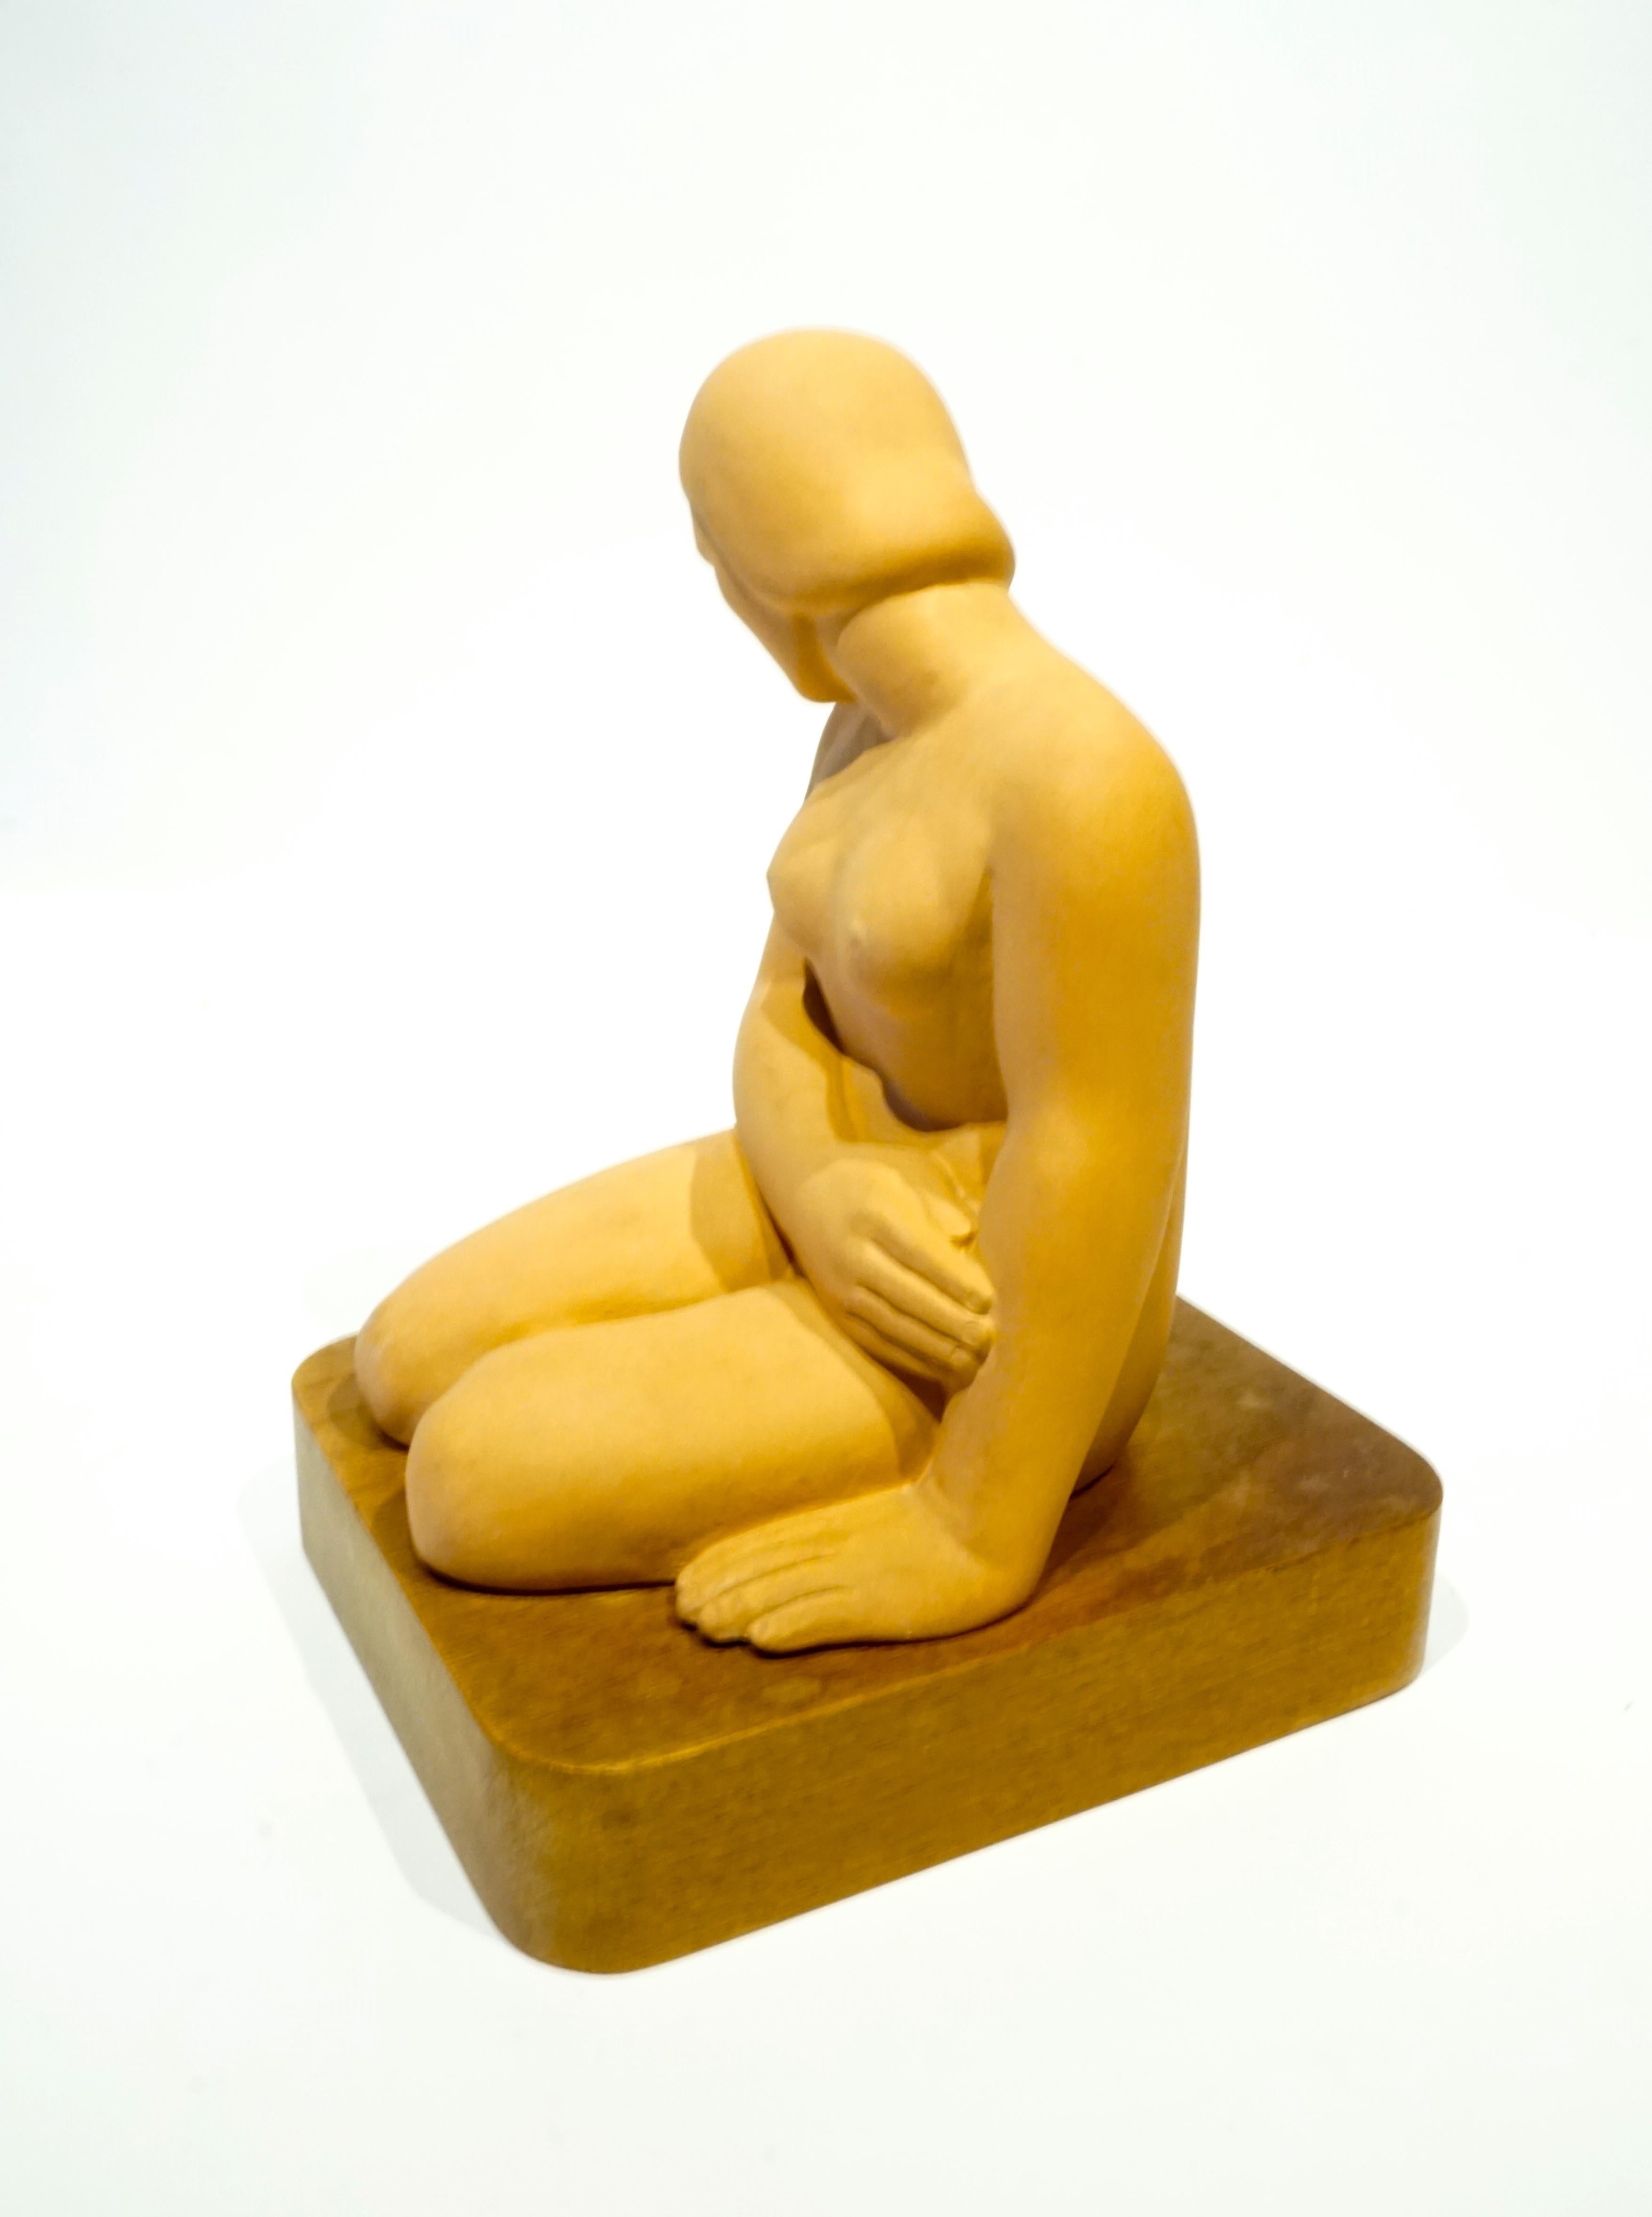 Art Moderne terracotta female figure on wooden base by San Francisco artist Vera Bernhard, circa 1940. The artist name appears tangentially in newspapers and in a San Francisco Art Museum exhibition guide in 1938. There is a pencil notation on the